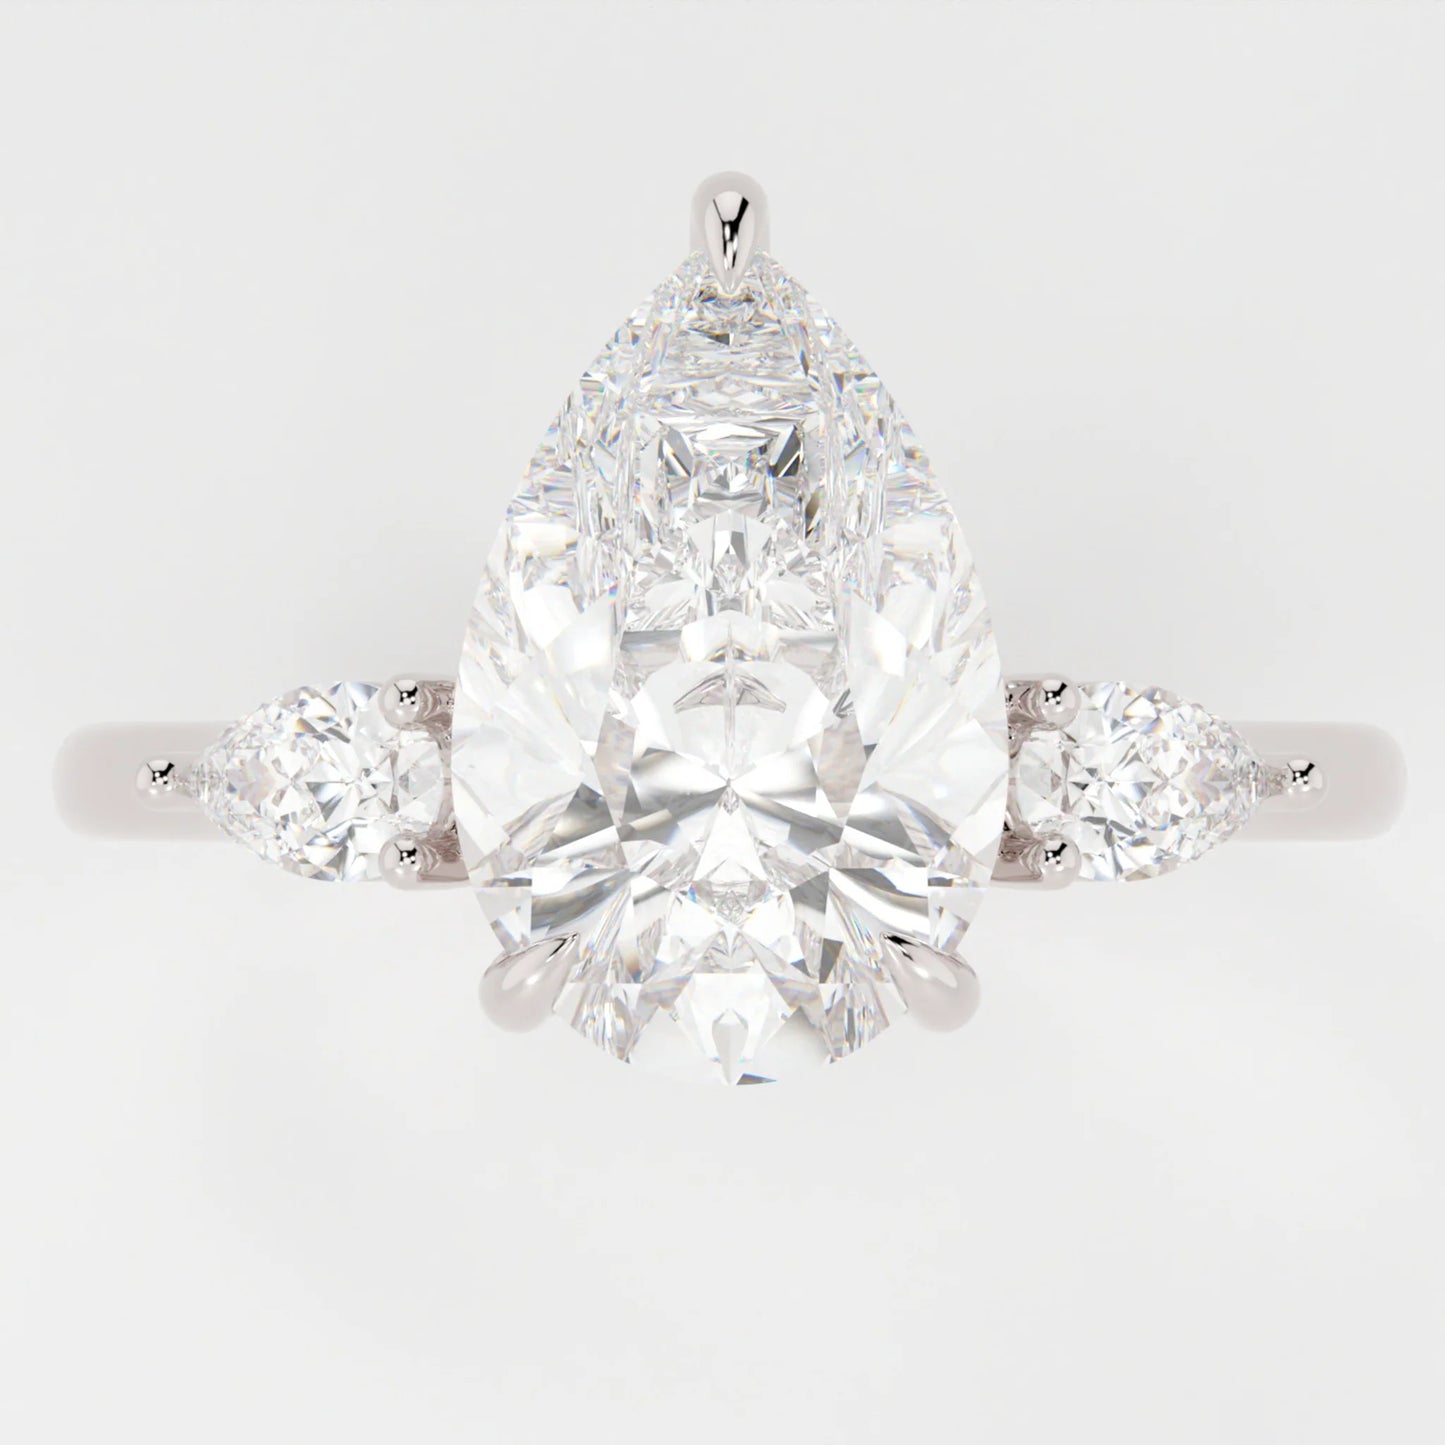 3.5 Carat Pear Cut Moissanite Diamond Engagement Ring with 3-Stone Setting